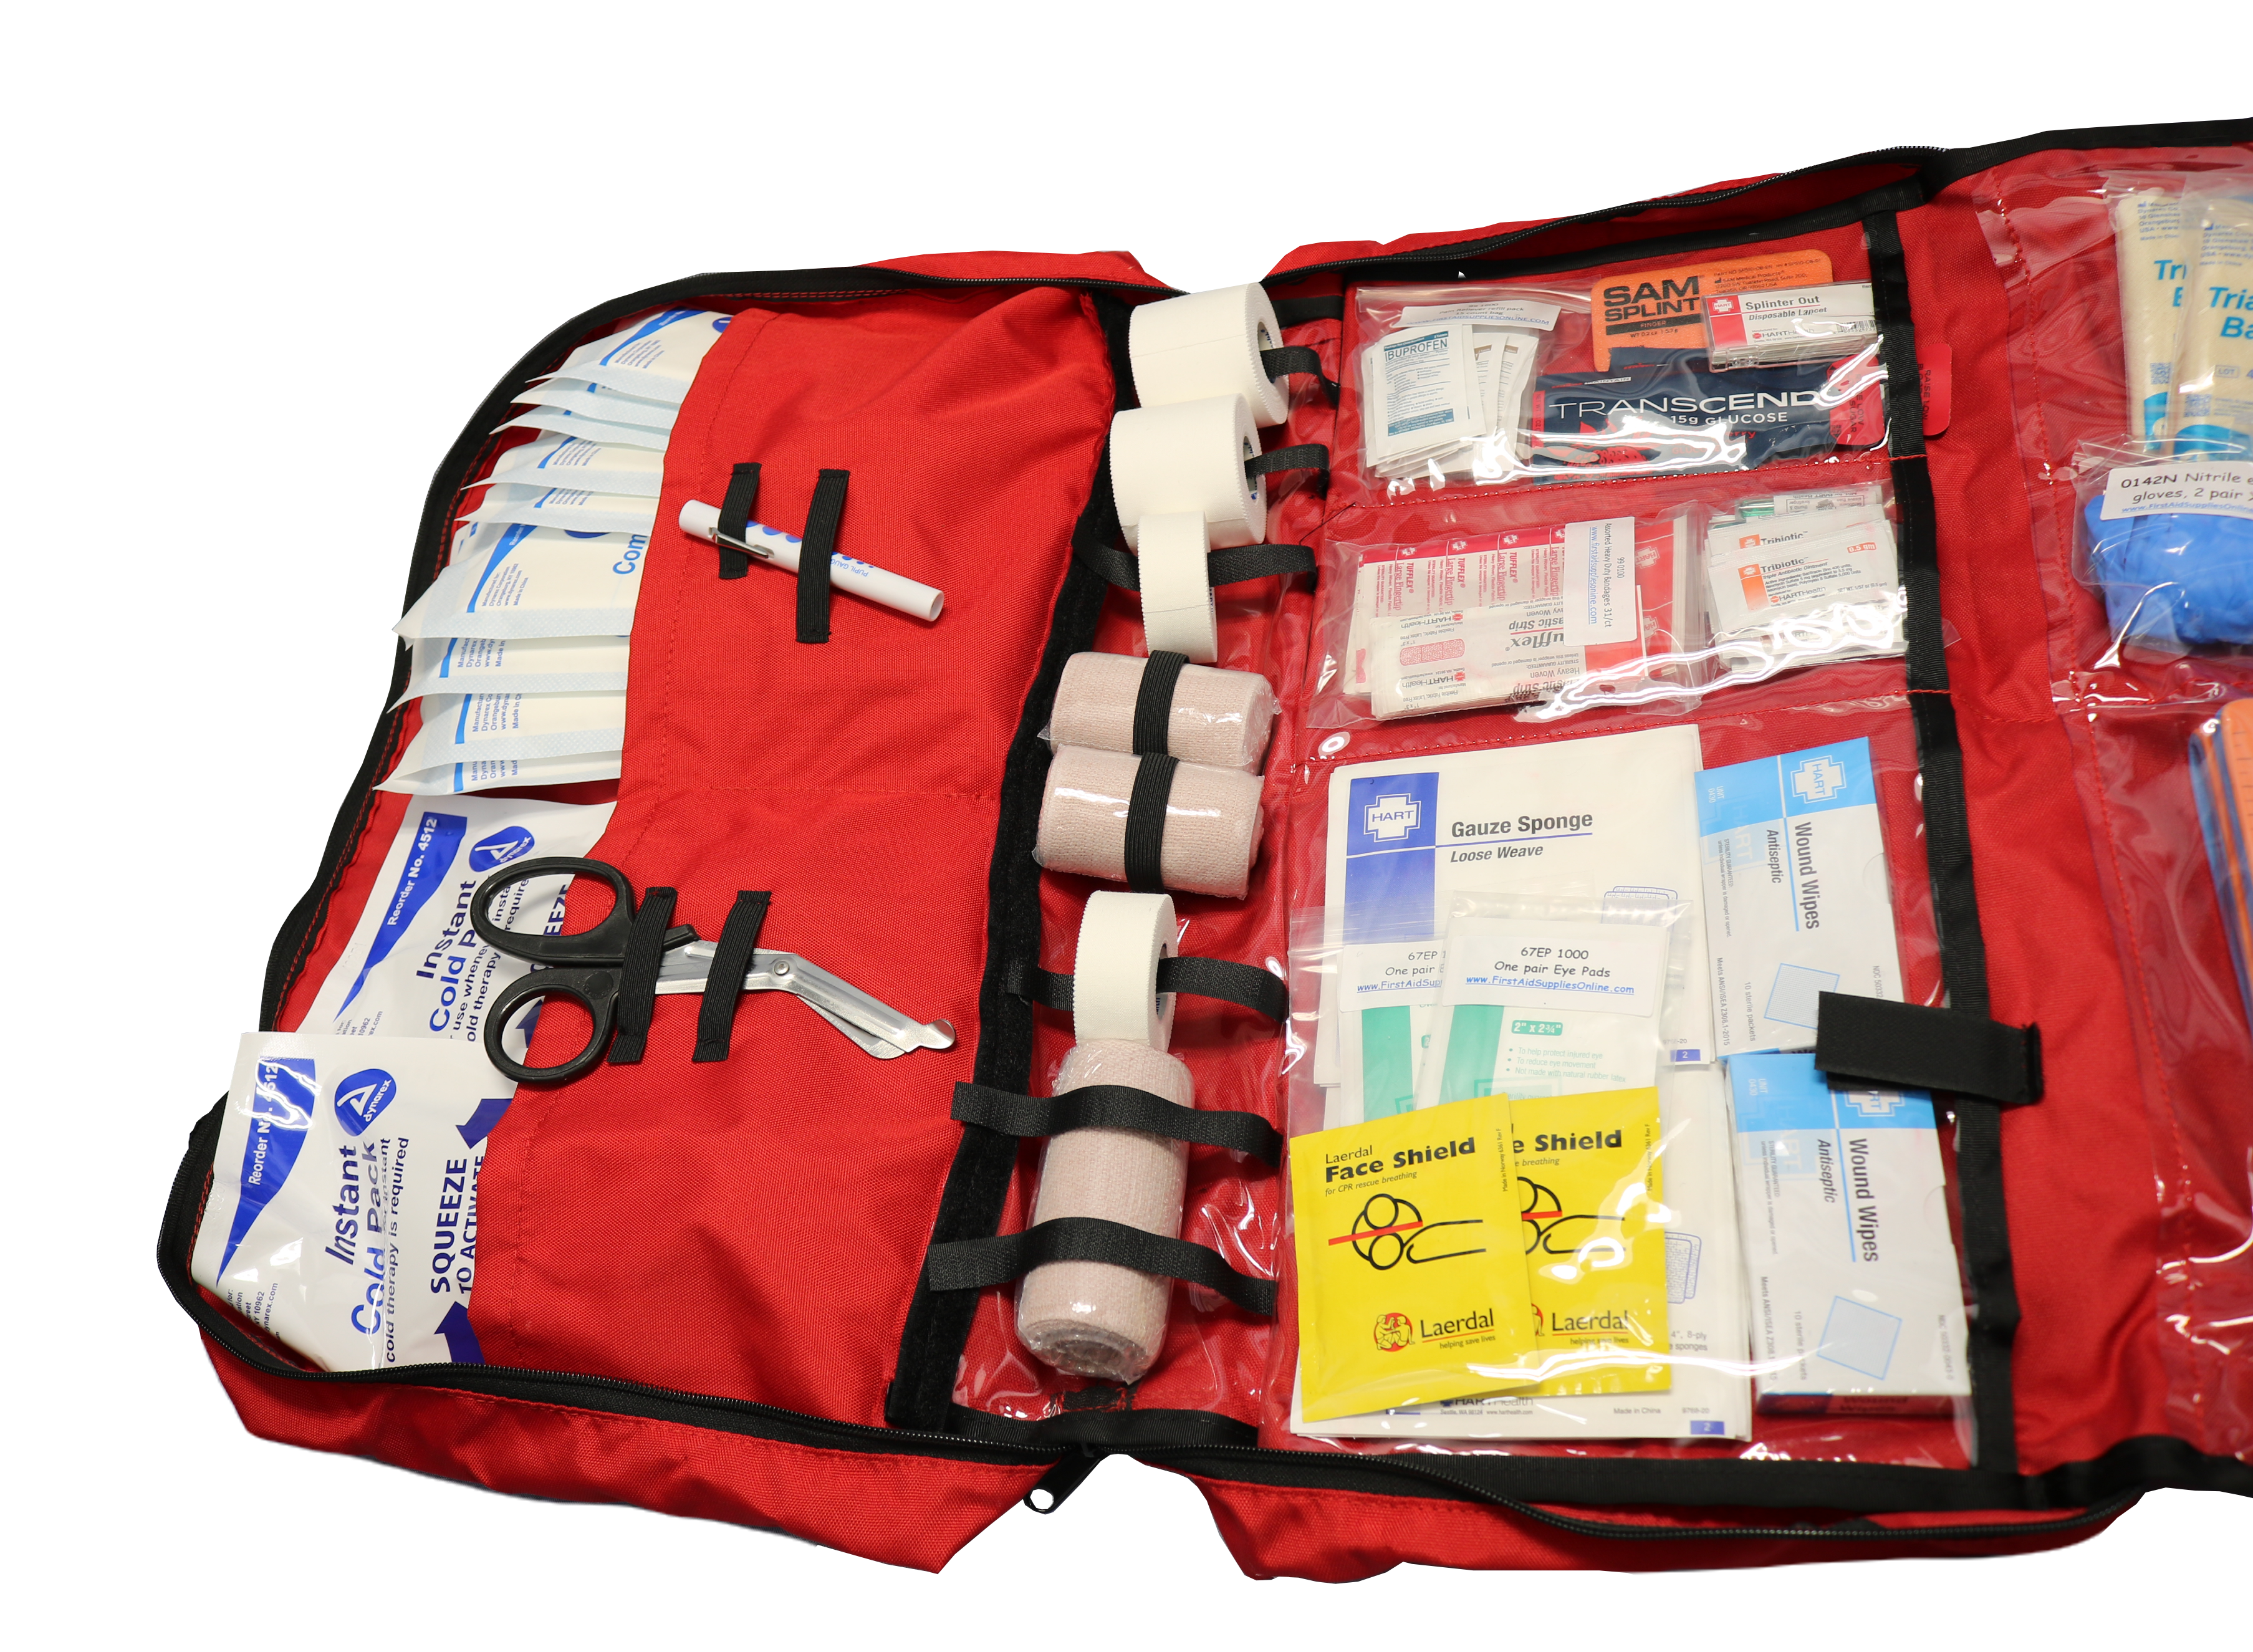 Care Plus First Aid Kit Emergency, extensive first aid kit